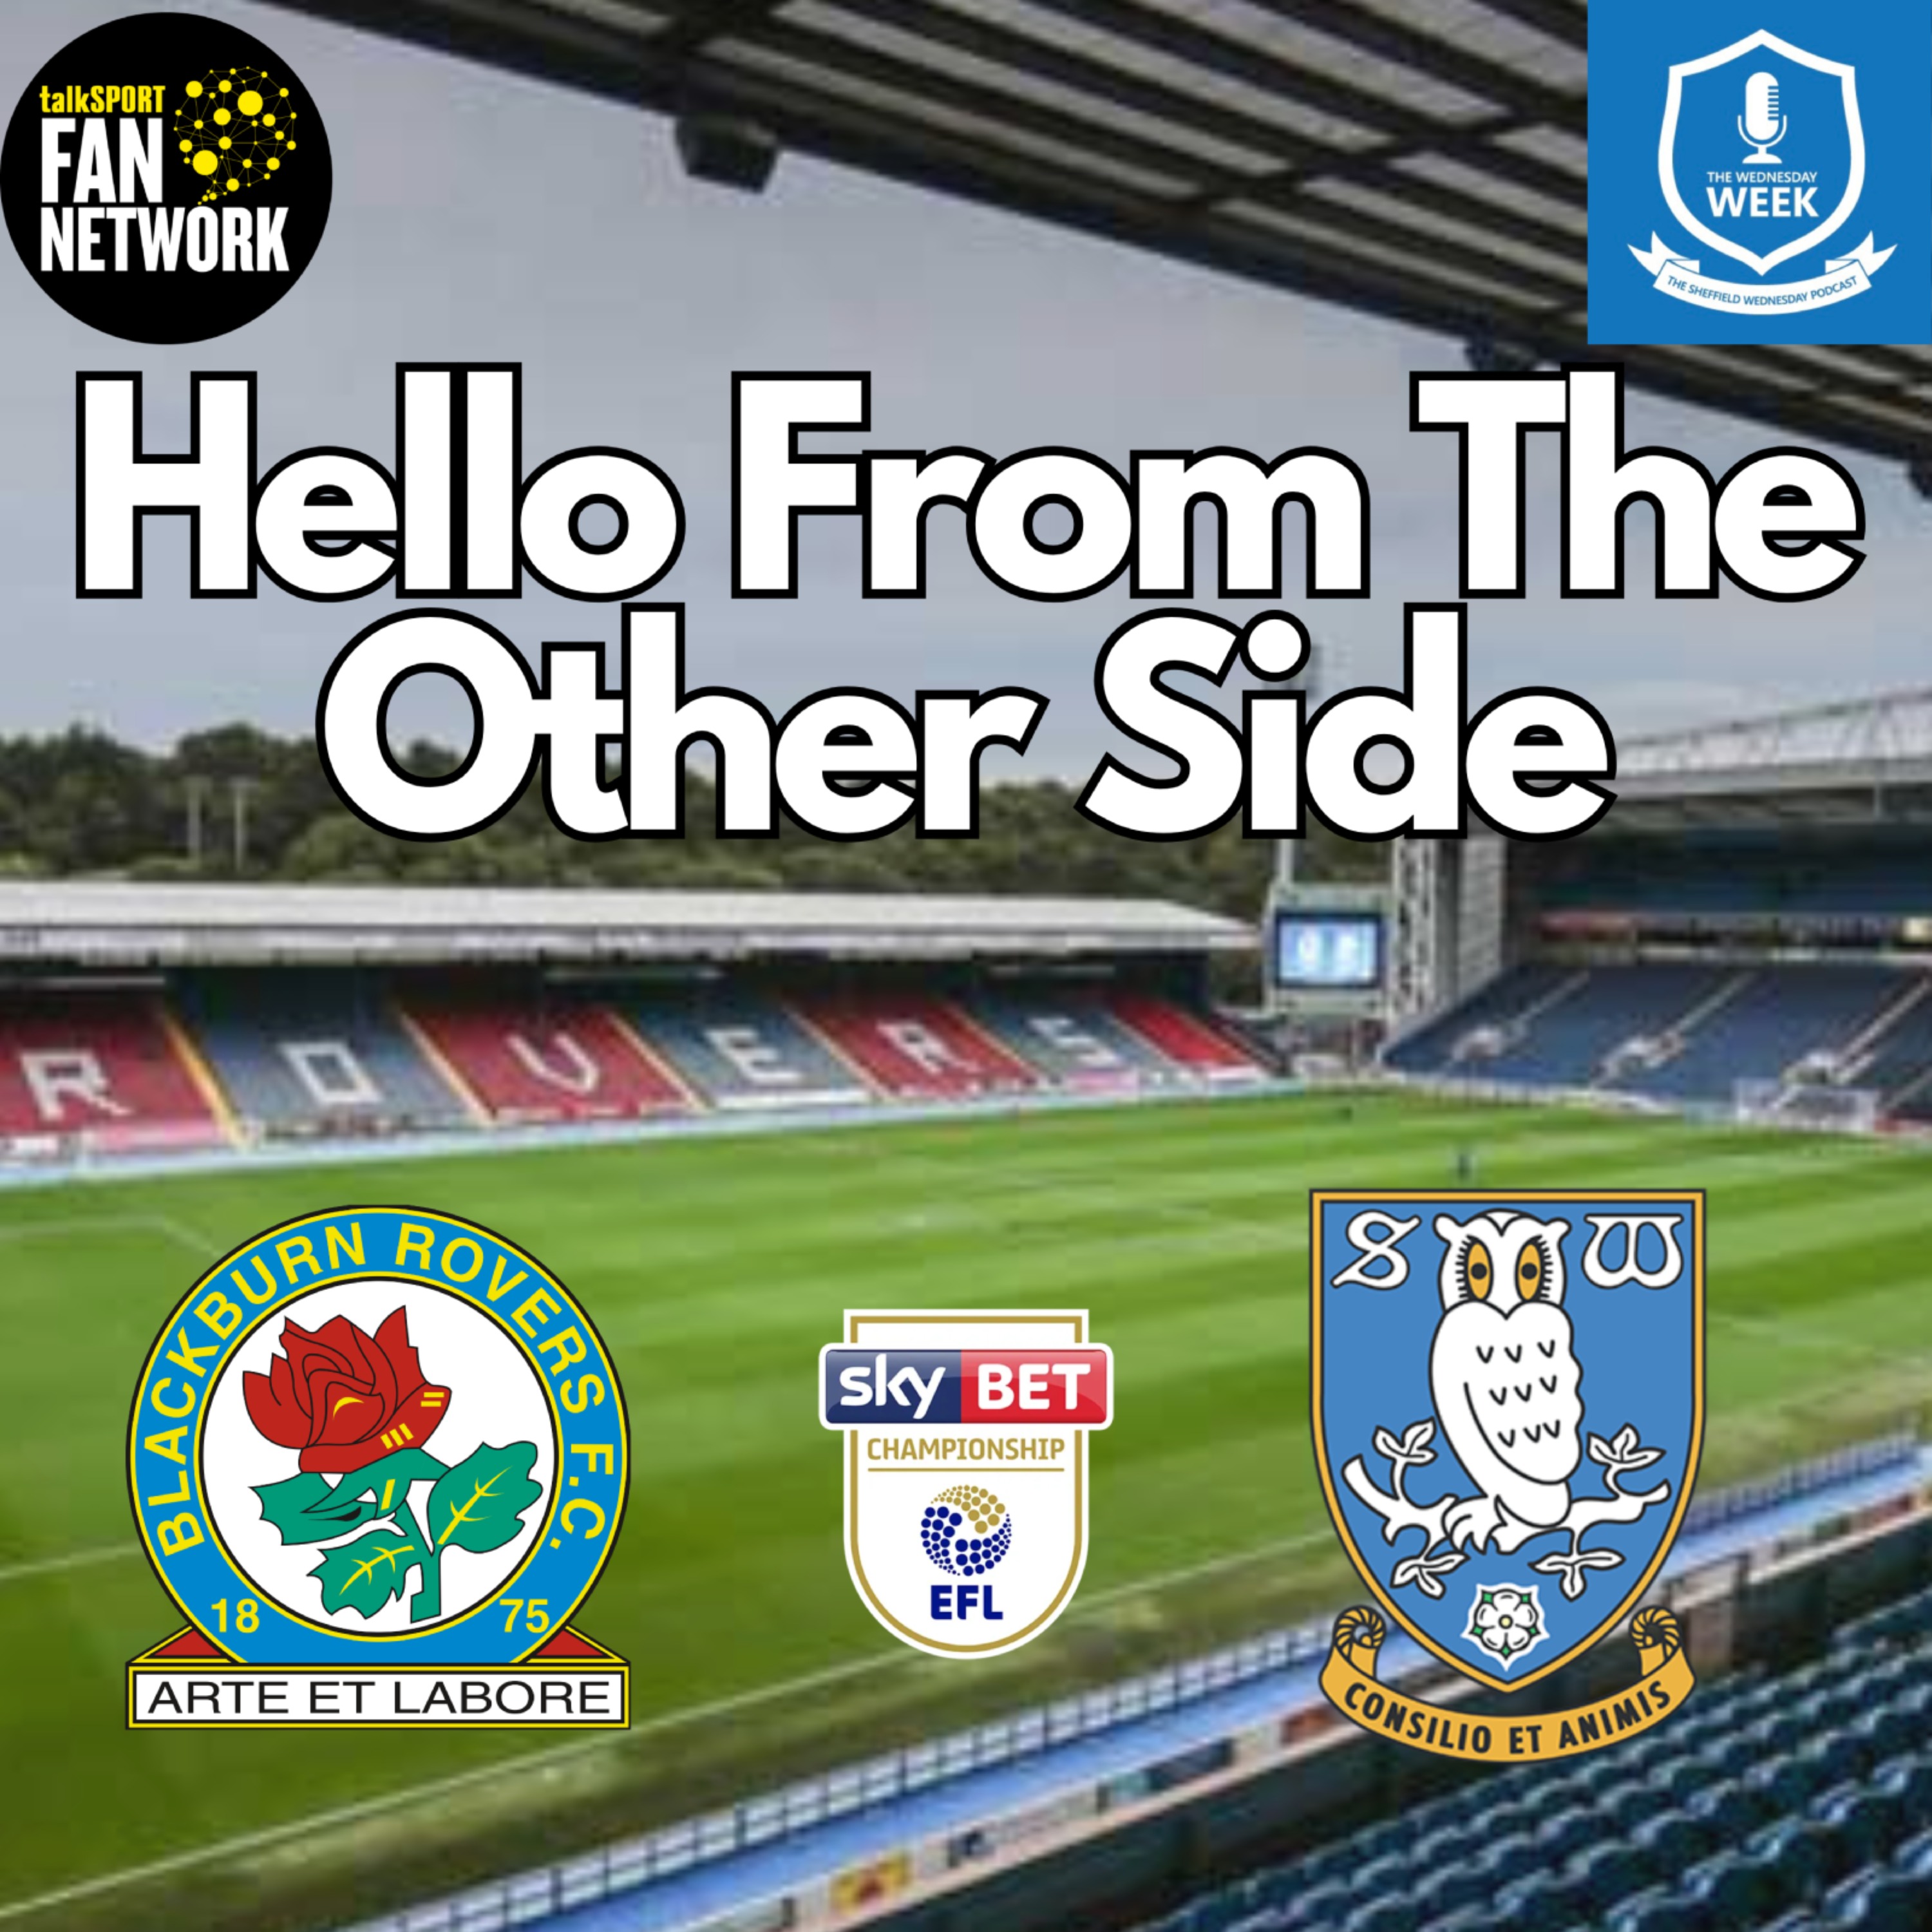 Hello From the Other Side - Blackburn Rovers